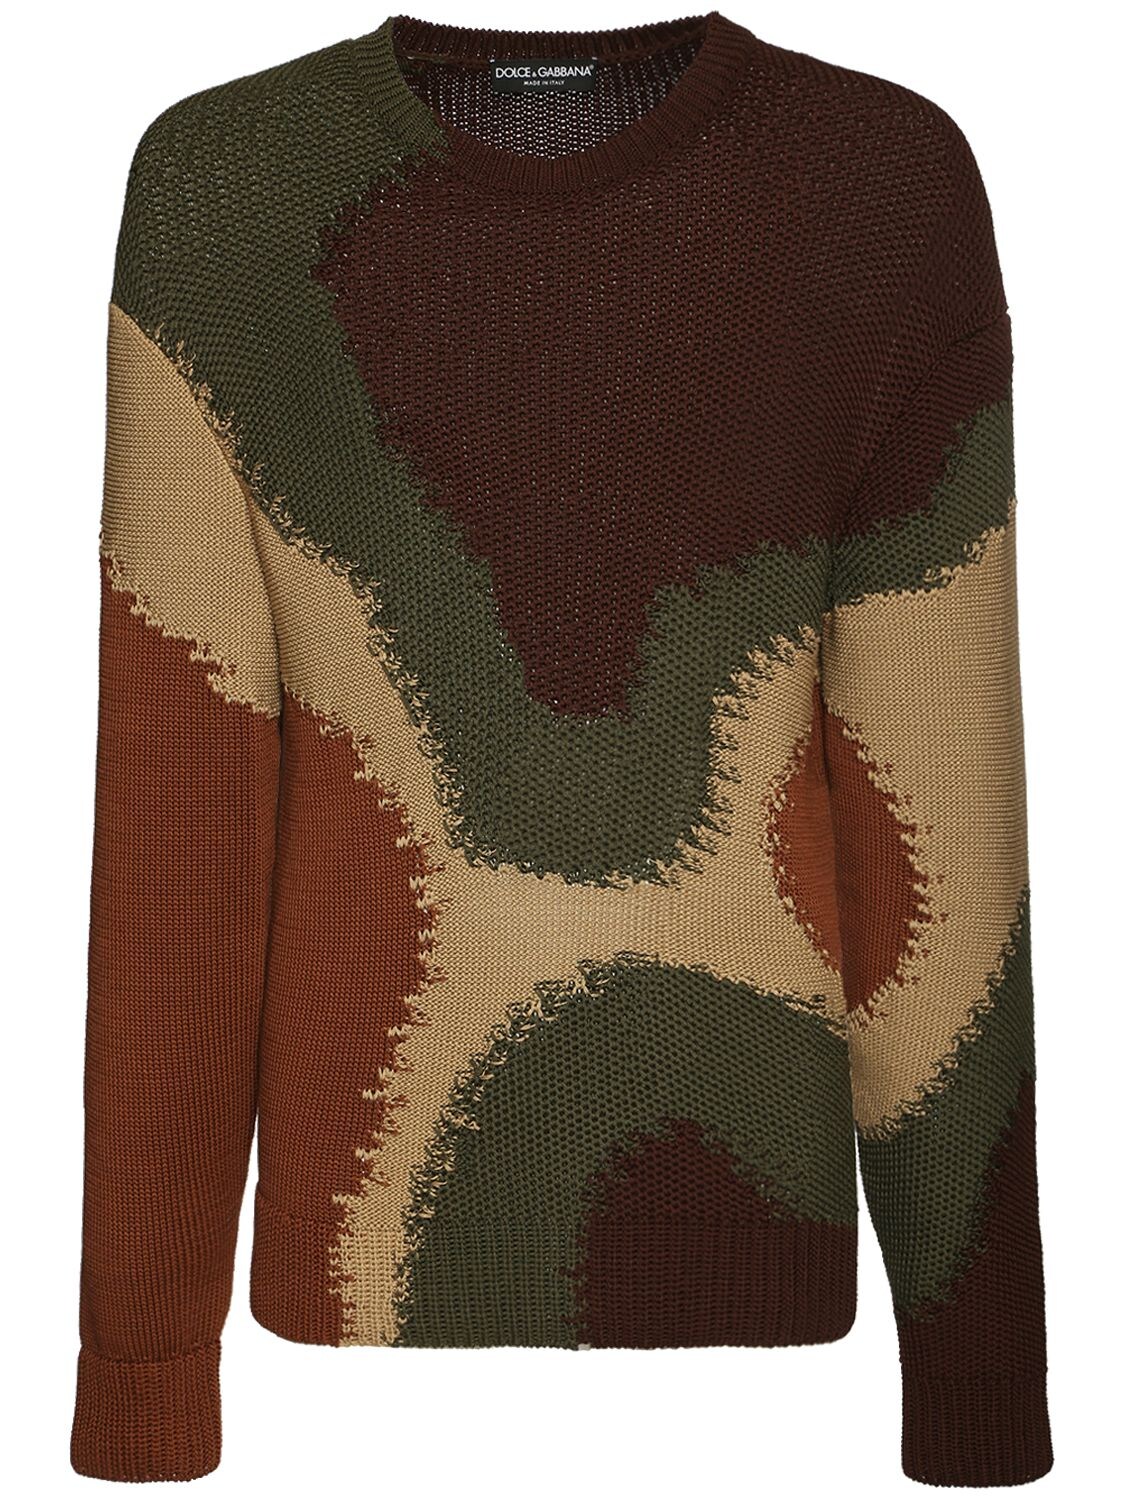 DOLCE & GABBANA GIANT CAMOUFLAGE COTTON KNIT jumper